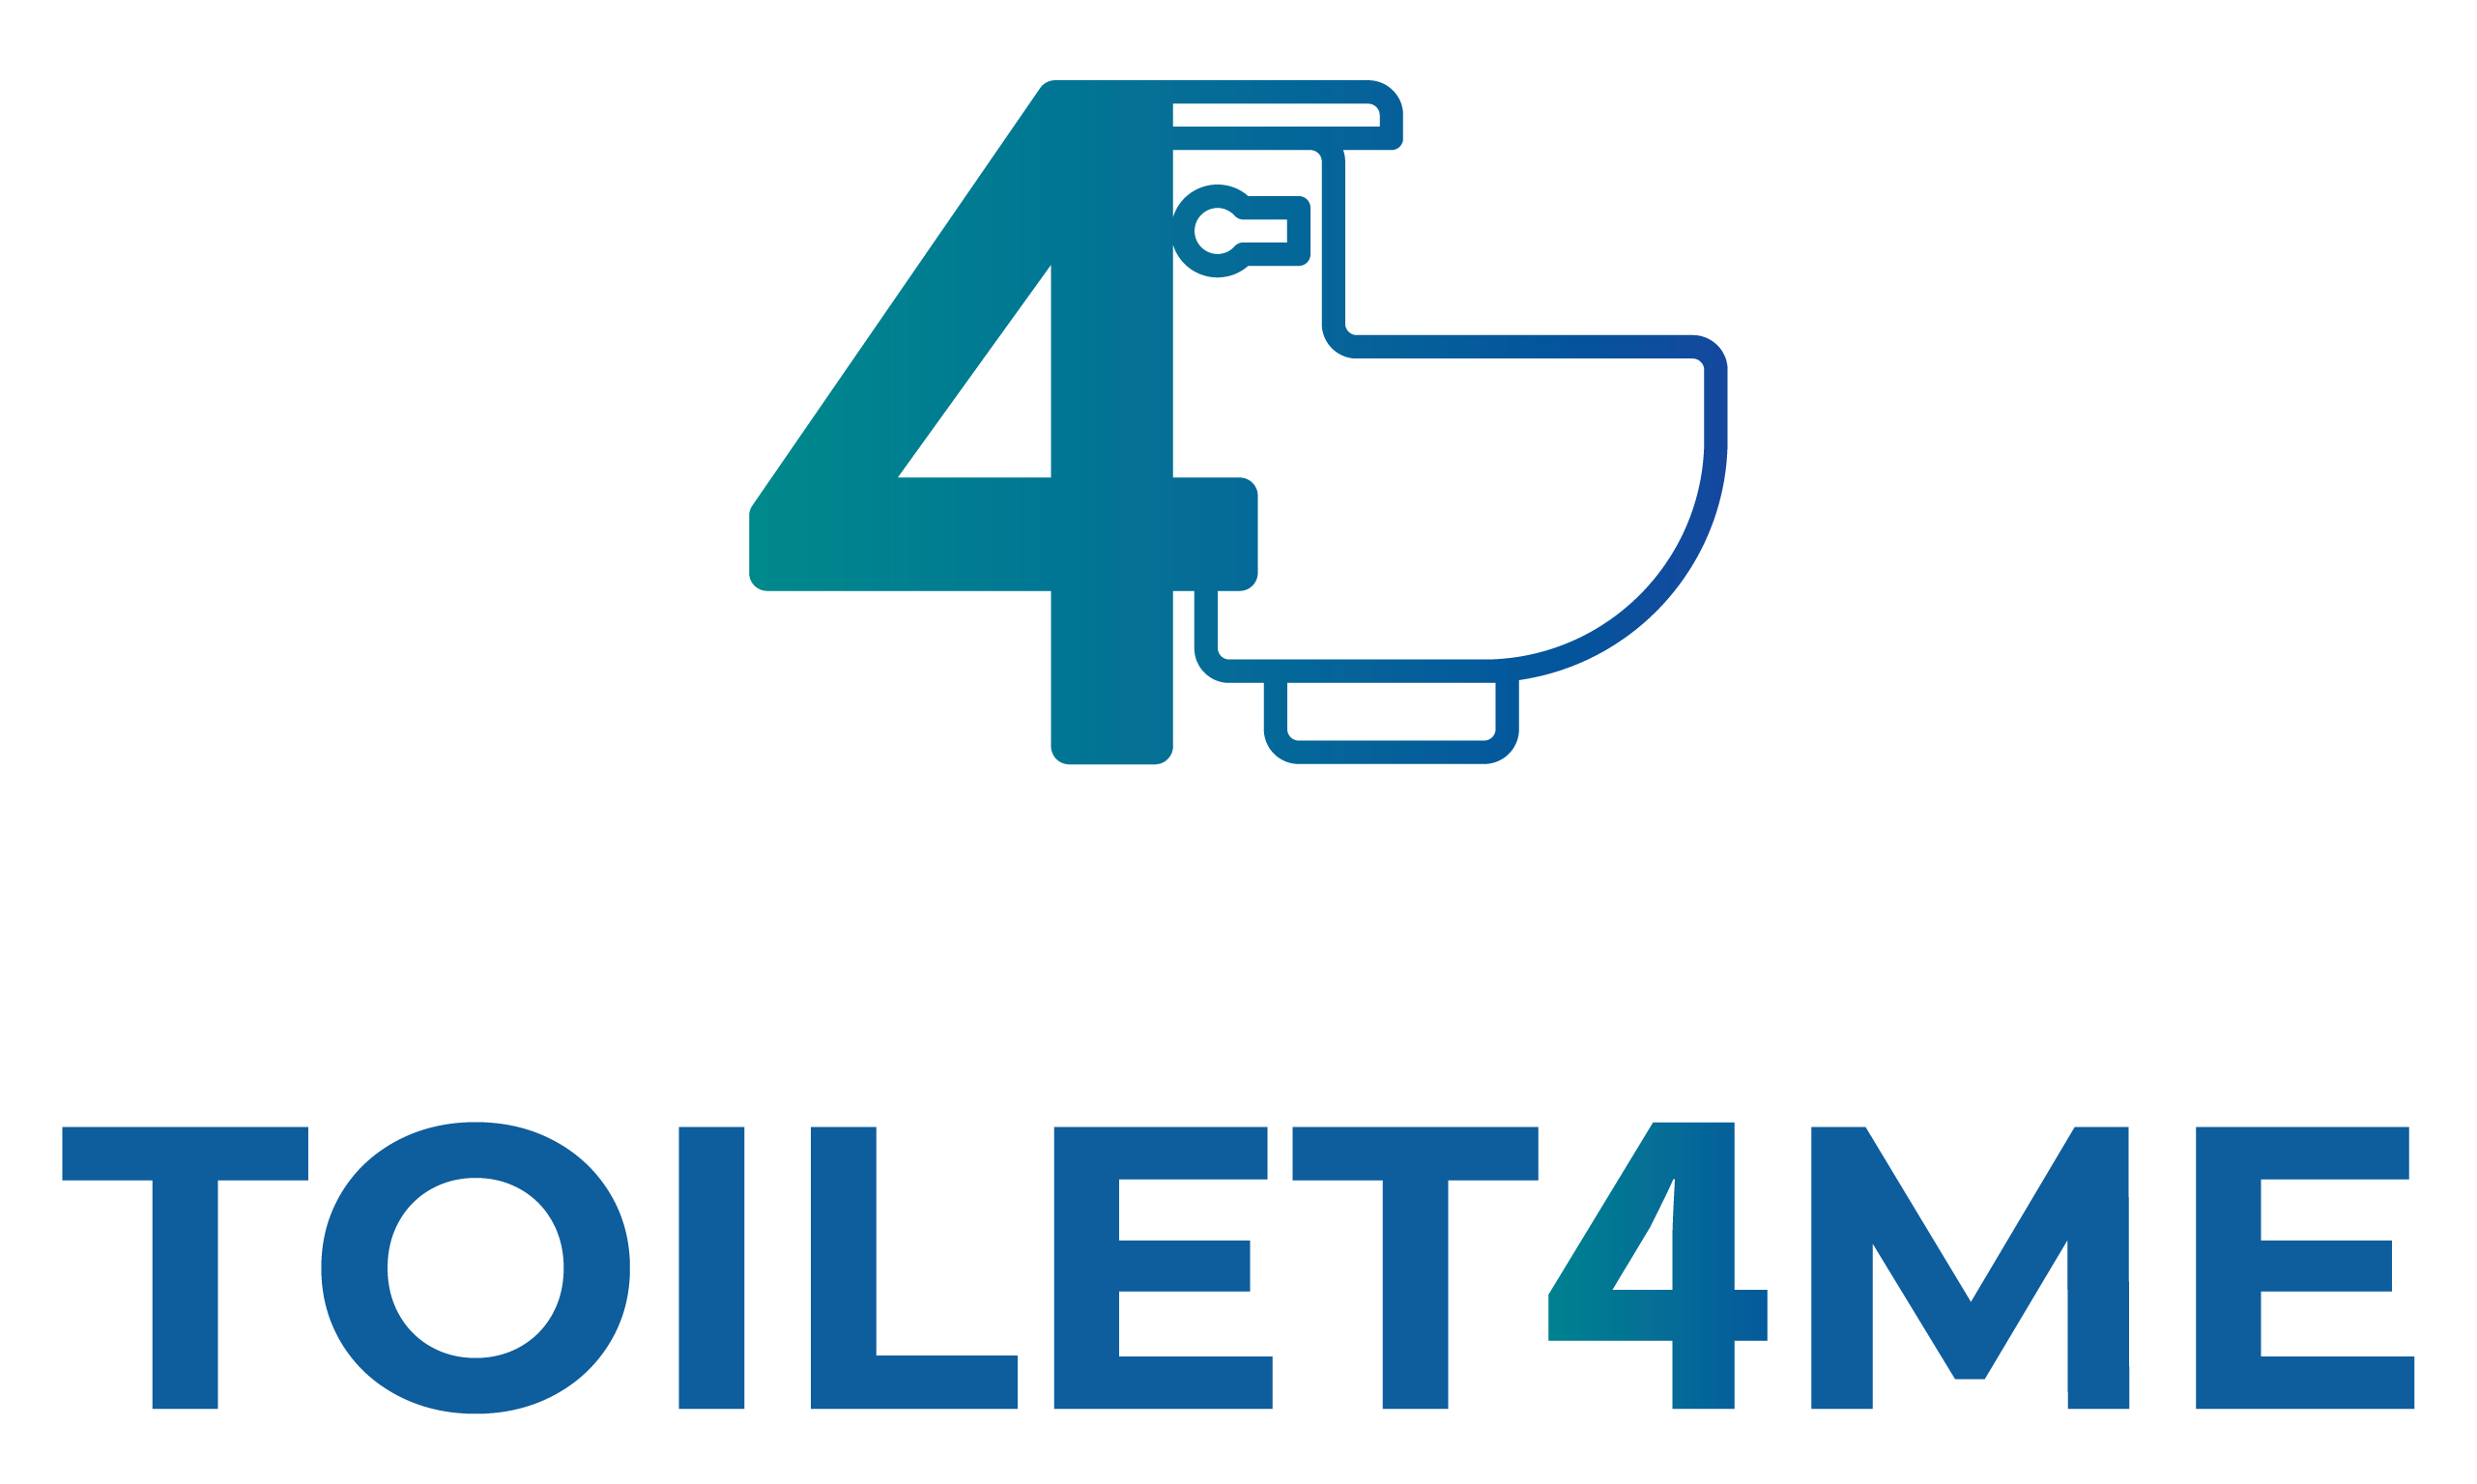 Toilet4me logo - active and assisted living